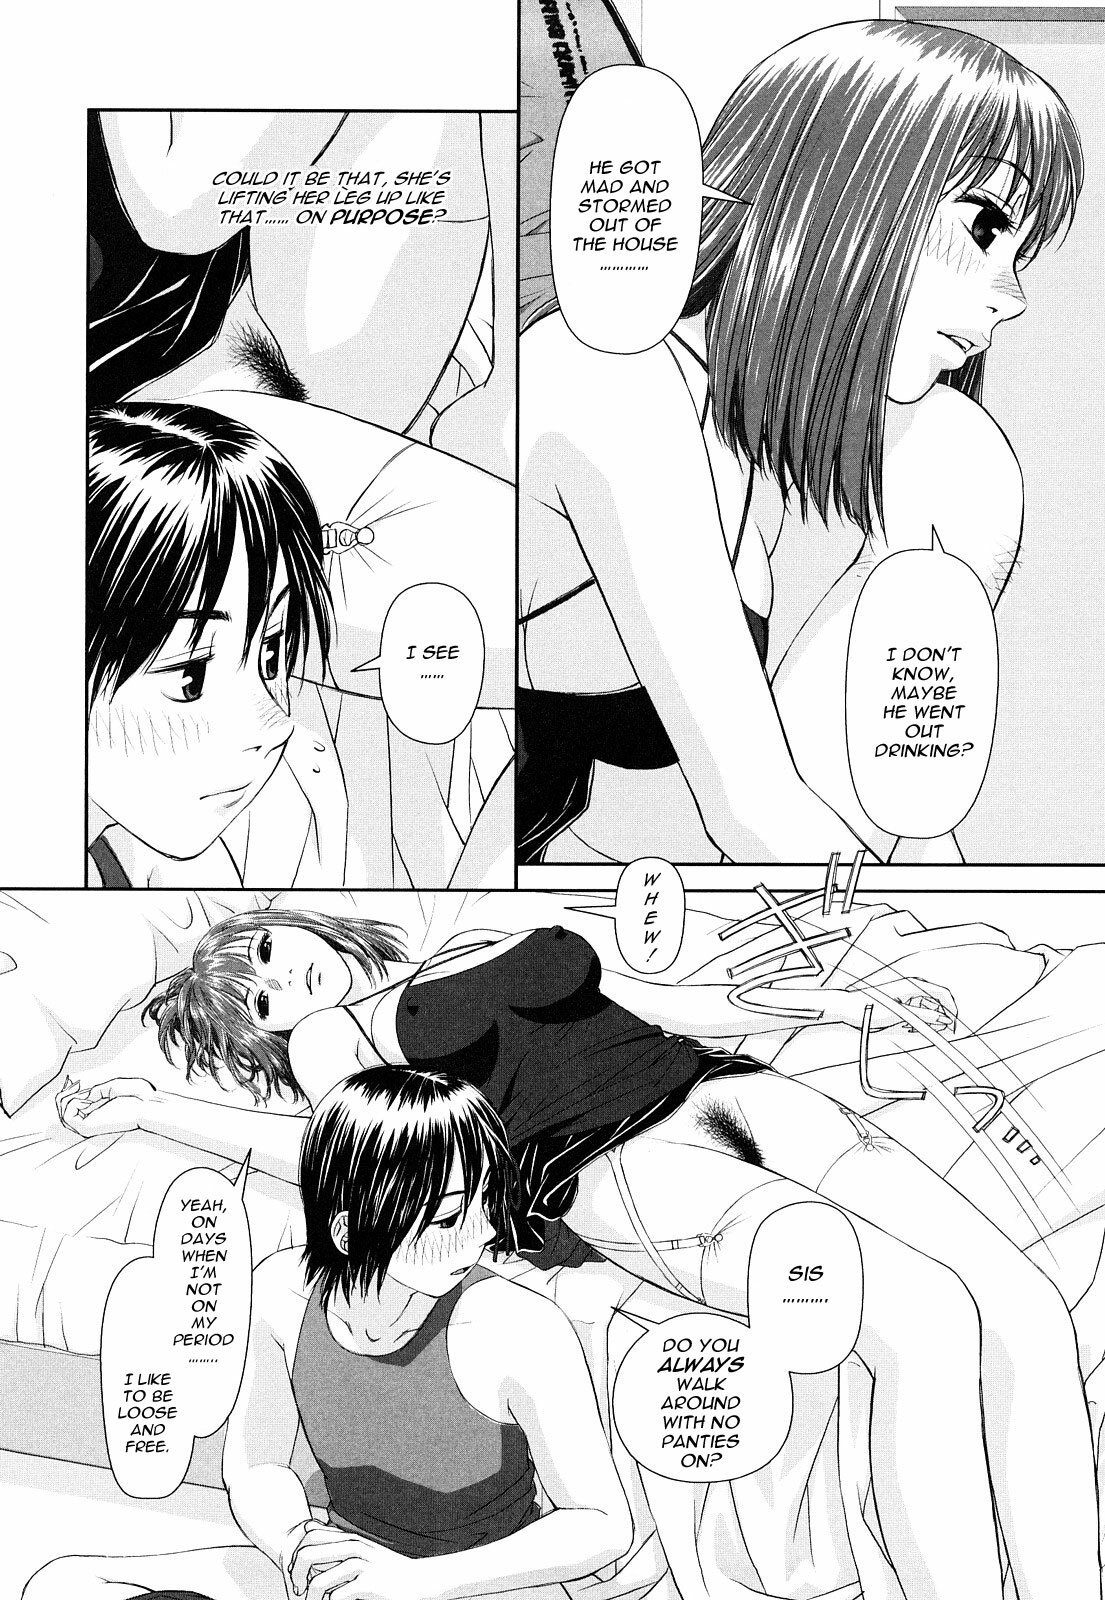 [Yui Toshiki] My Sisters Ch.01-04, 07 (Ch.01-03 Decensored) [English] page 12 full